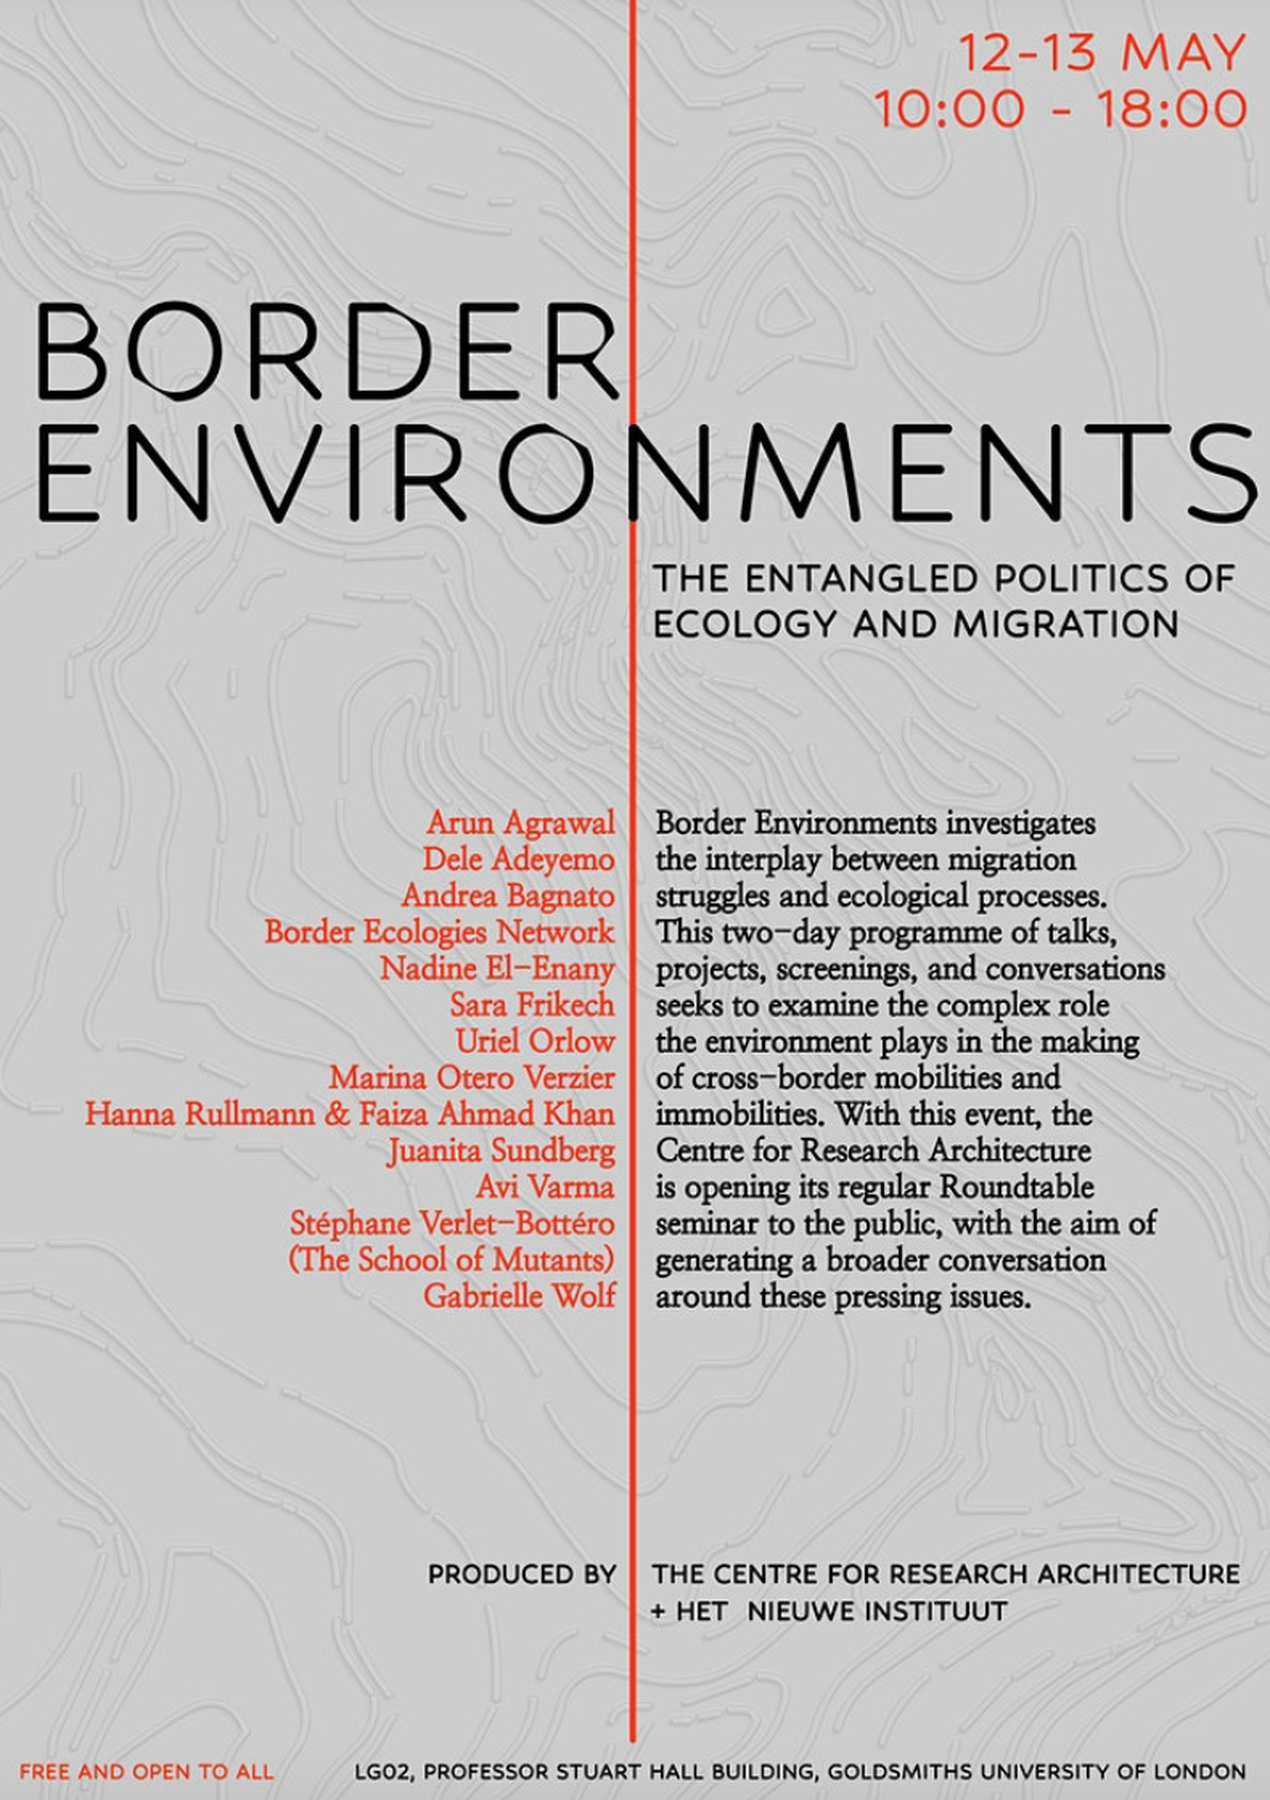 Border Environments: The entangled politics of ecology and migration